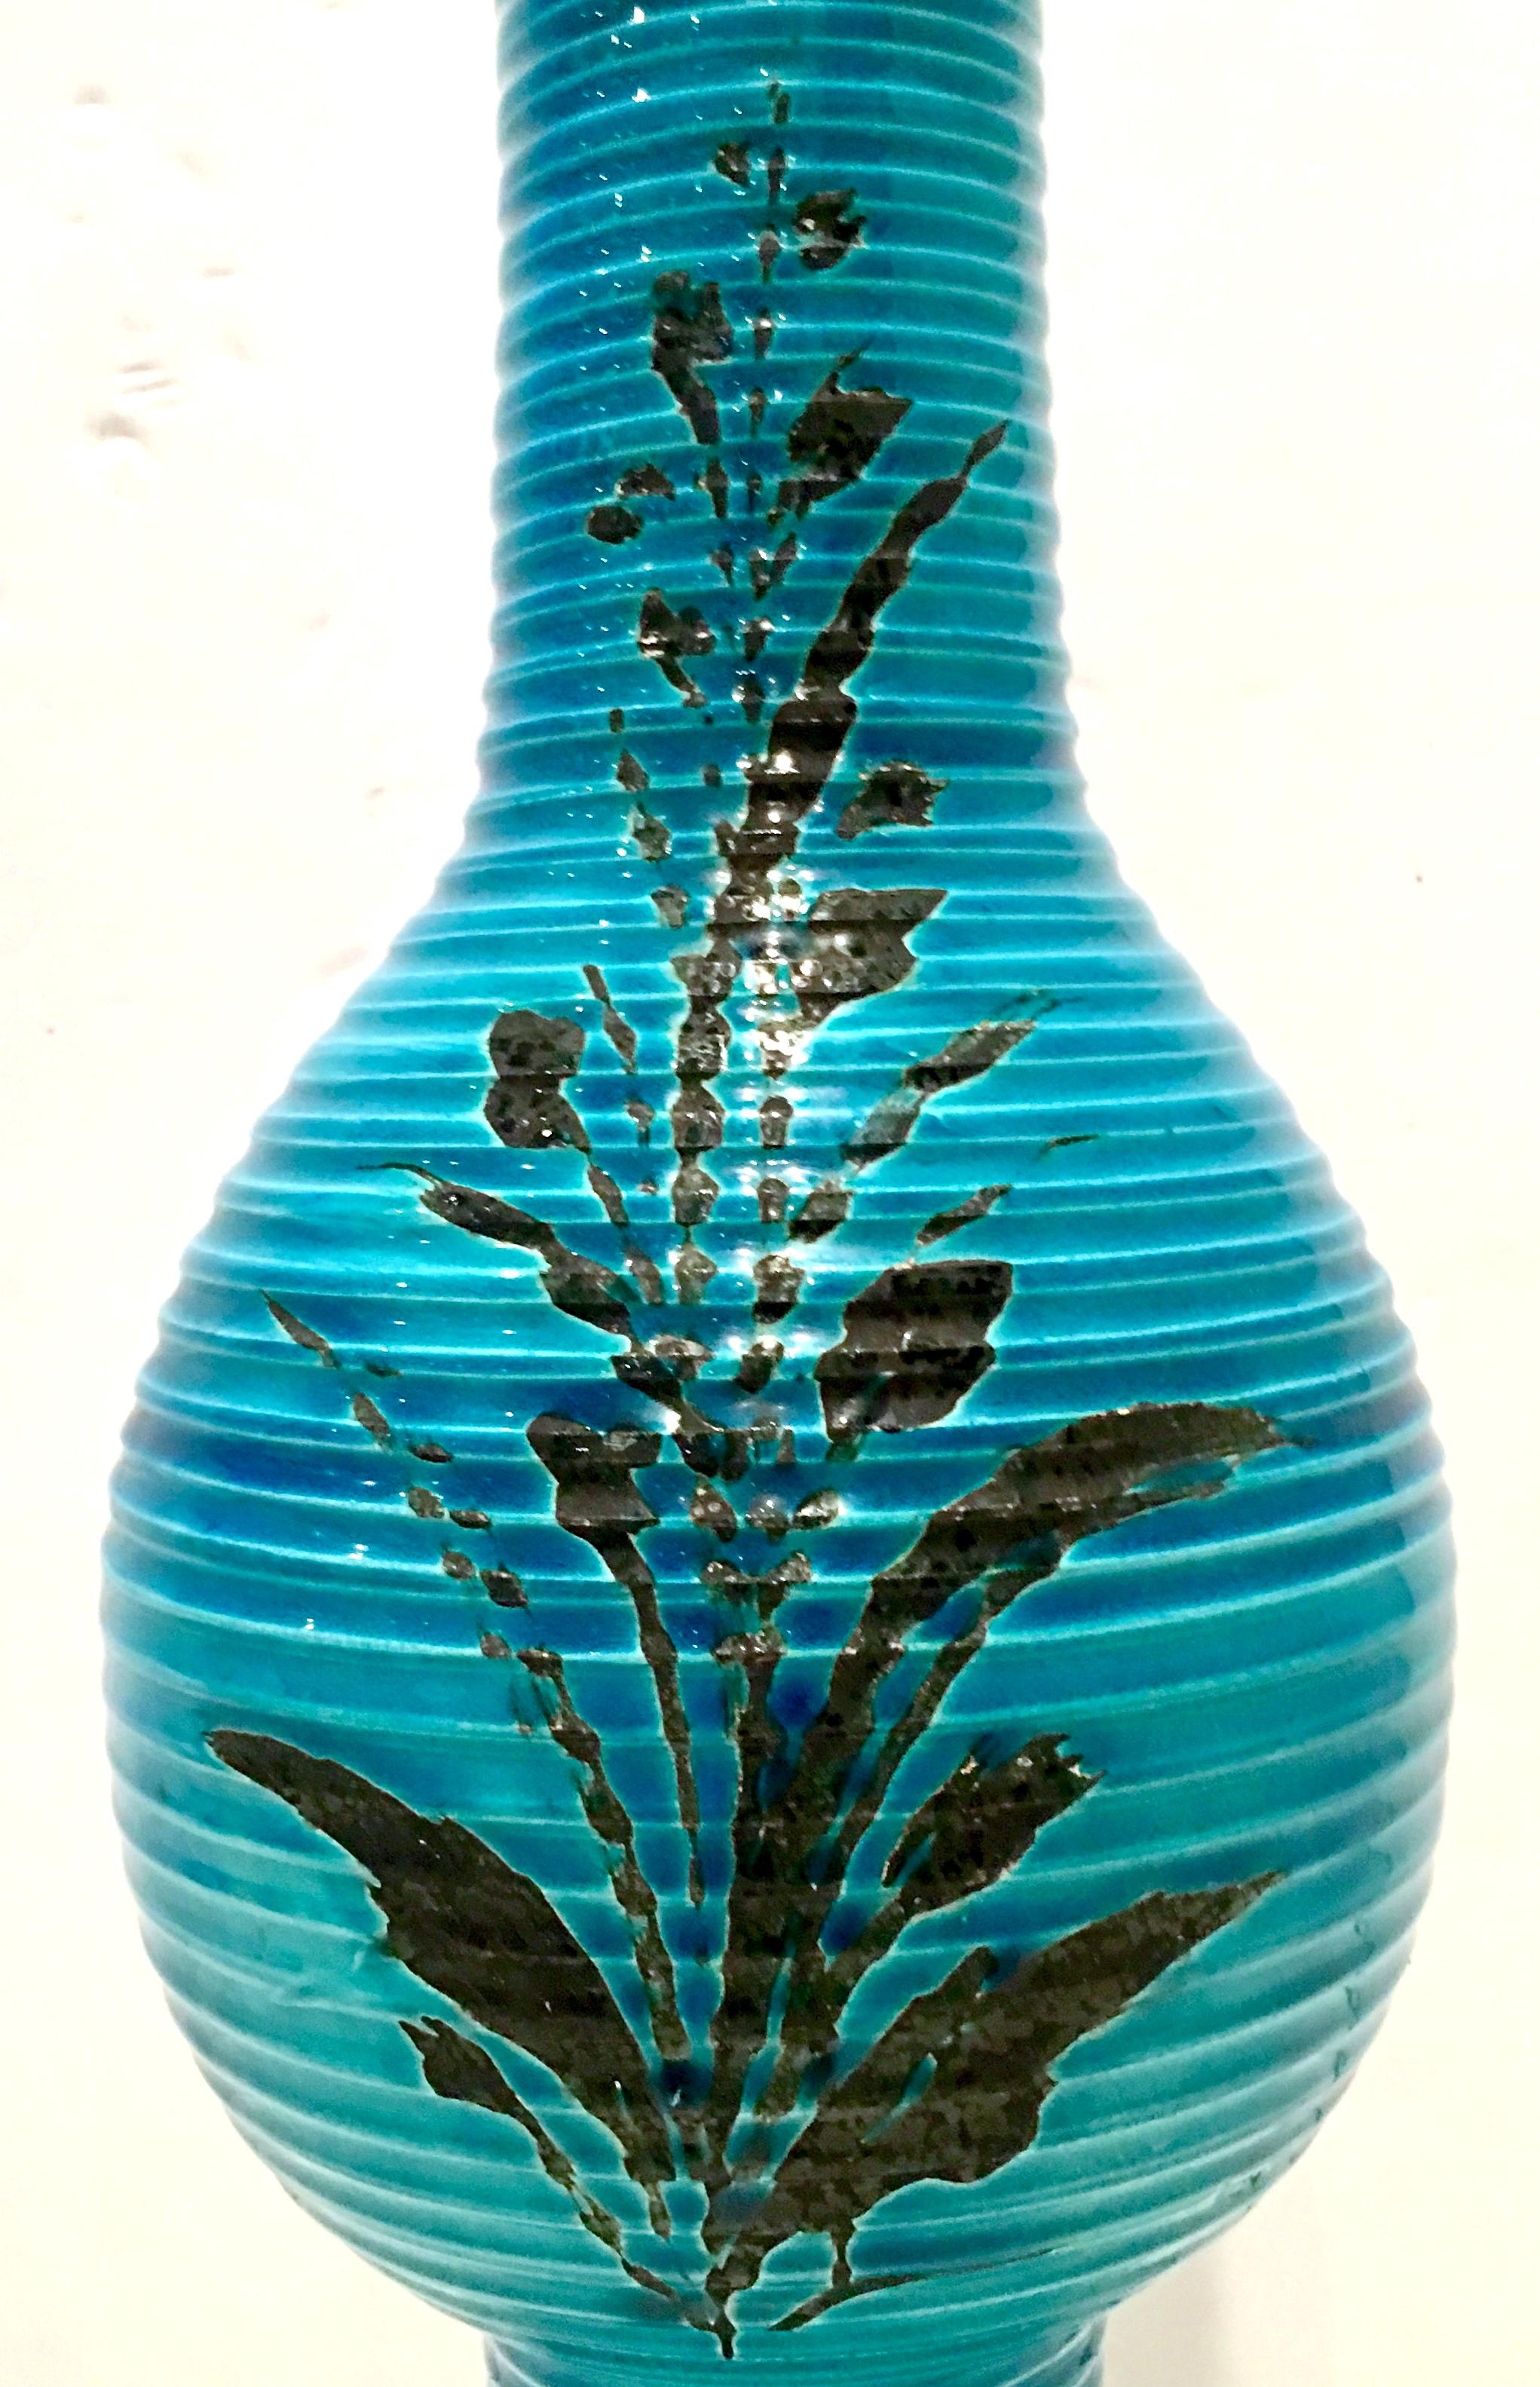 1960s Italian Cerulean Blue and Black Ceramic Glaze Pottery Lamp by, Bitossi For Sale 2